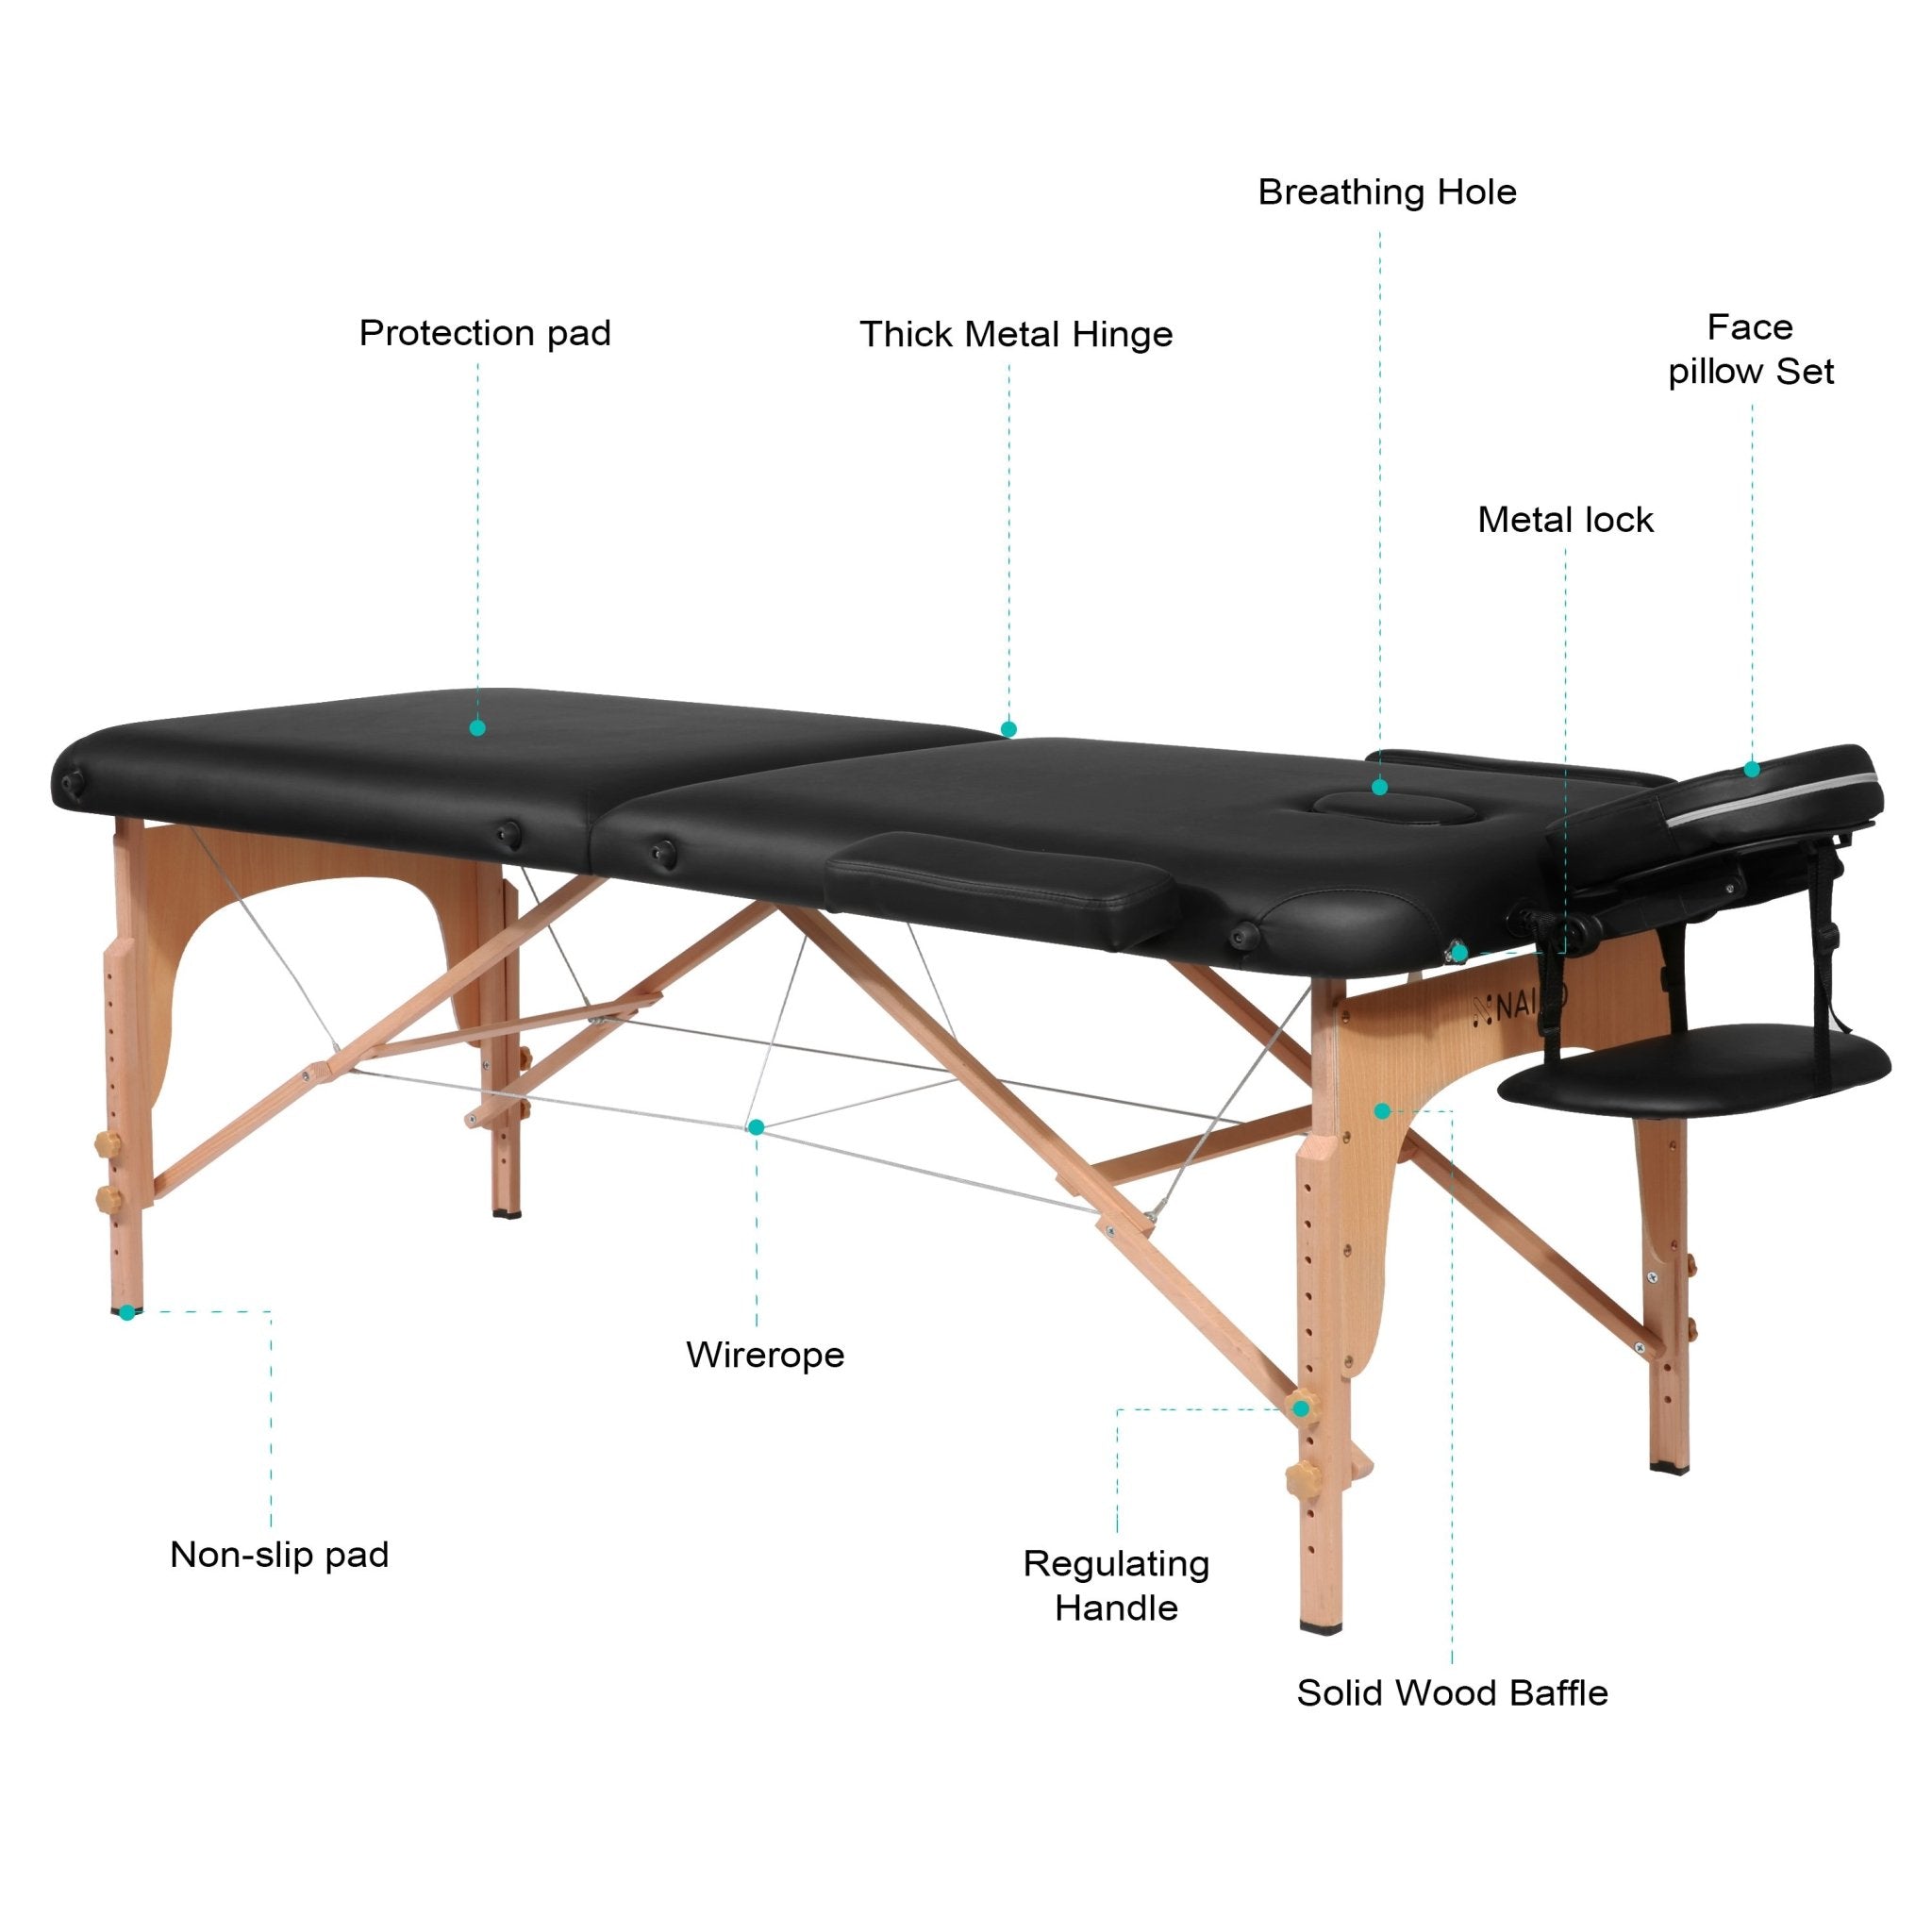 Load image into Gallery viewer, Naipo Portable Massage Table with Wooden Feet - NAIPO
